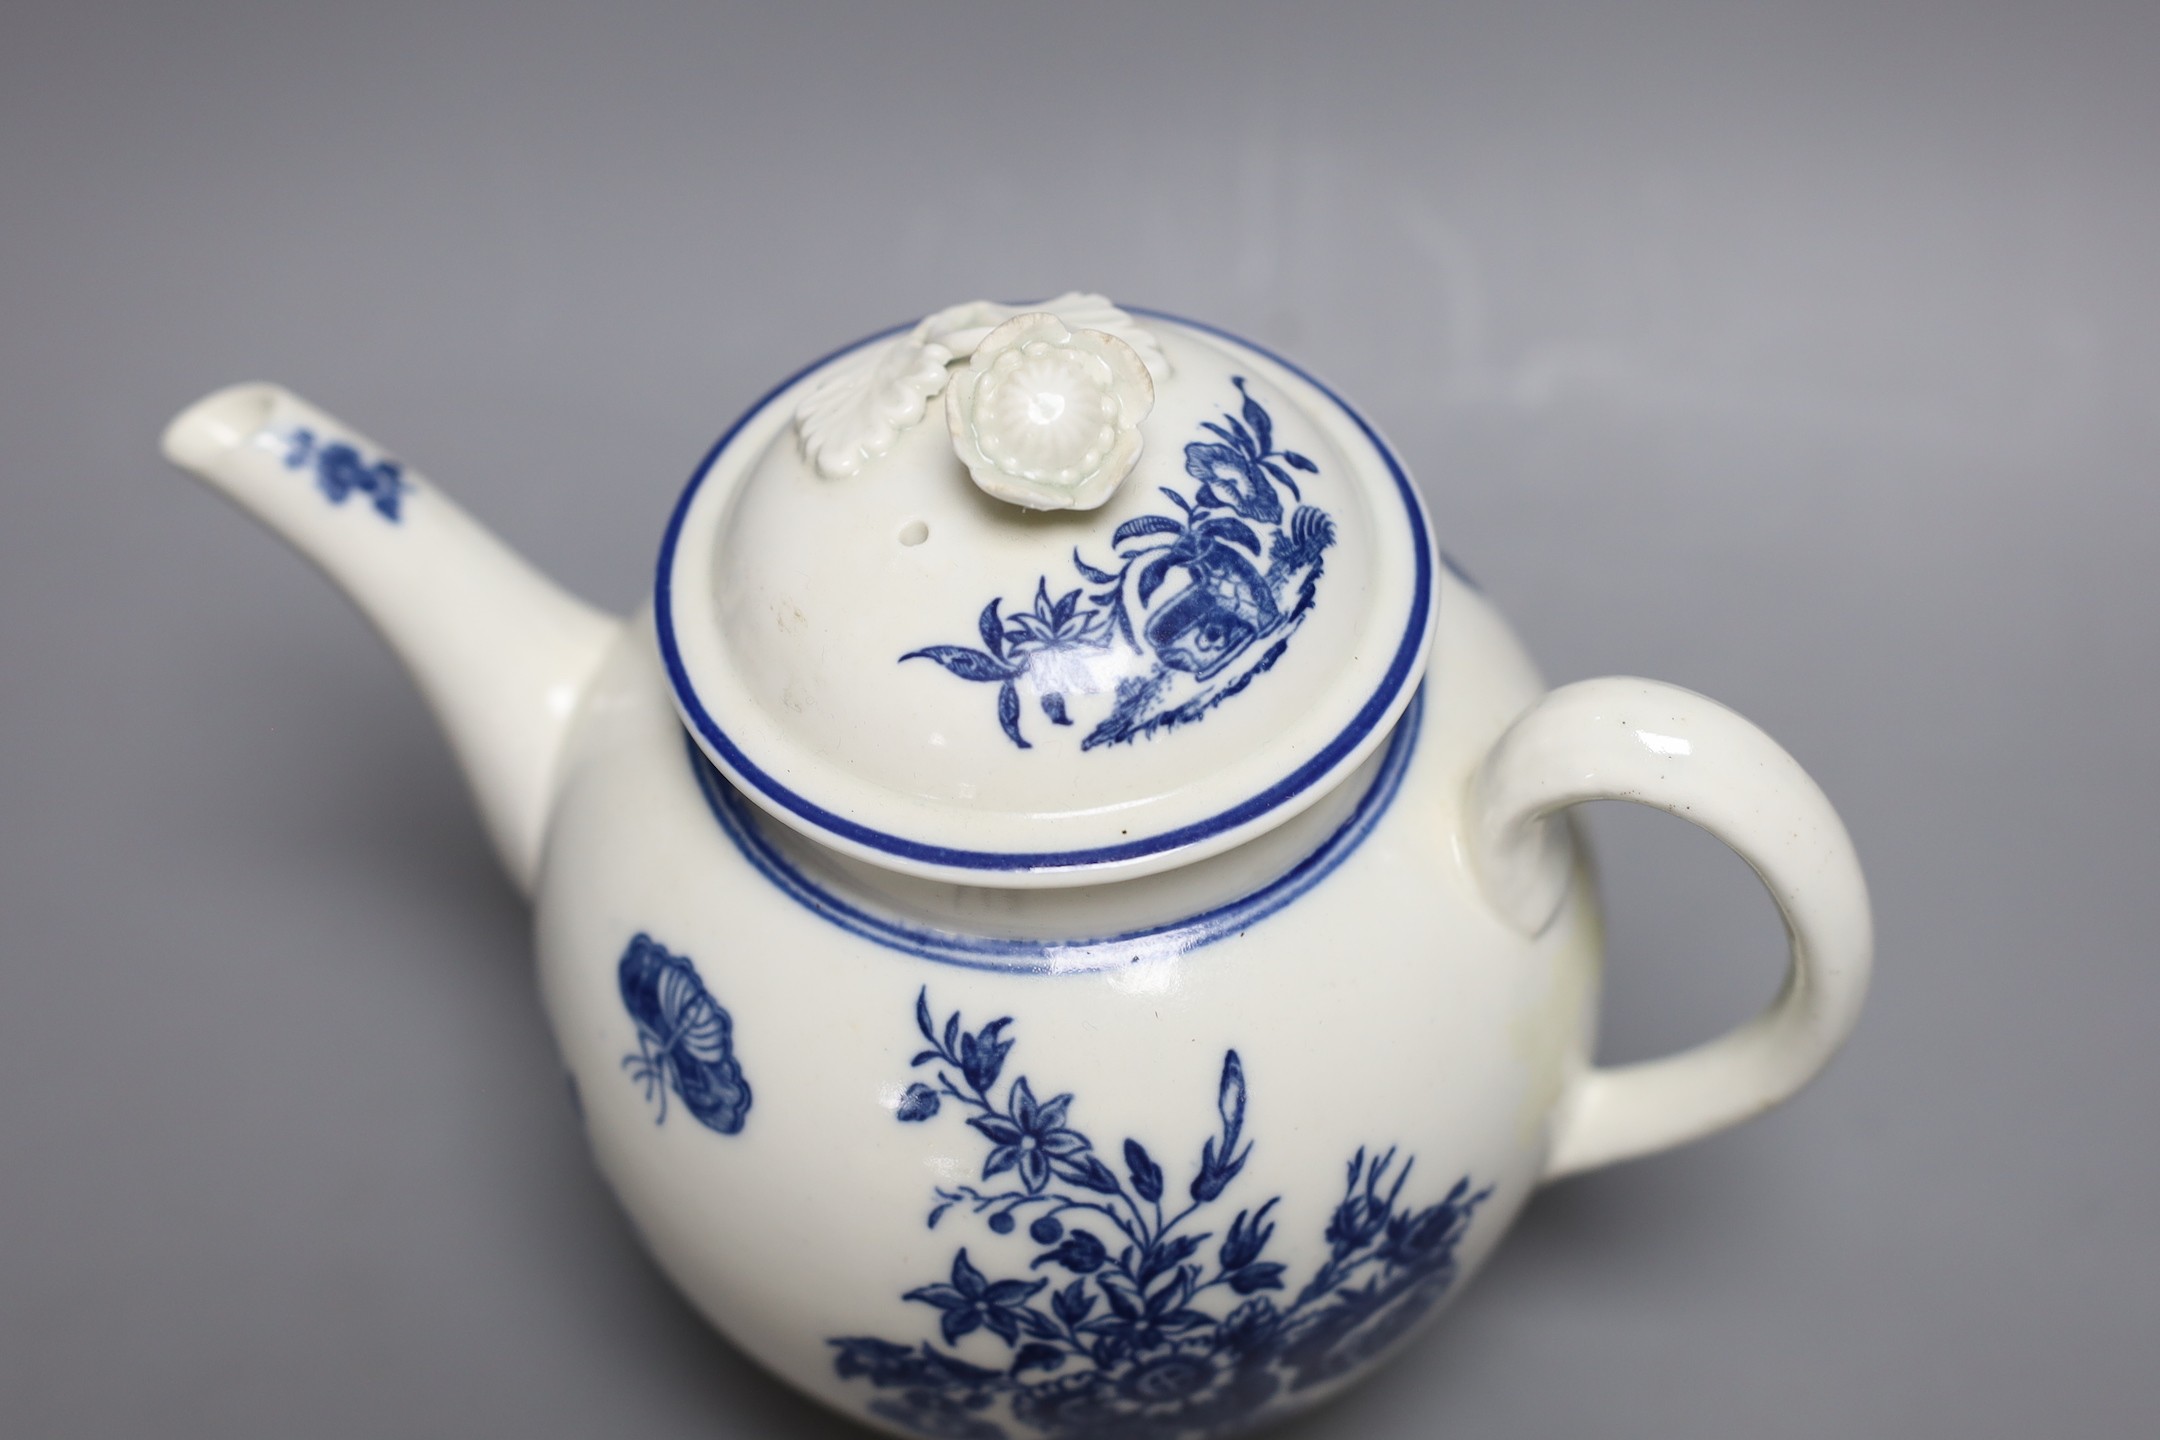 A Caughley teapot and cover printed in underglaze blue with the Three Flowers pattern, S mark in blue to base, 17 cms high